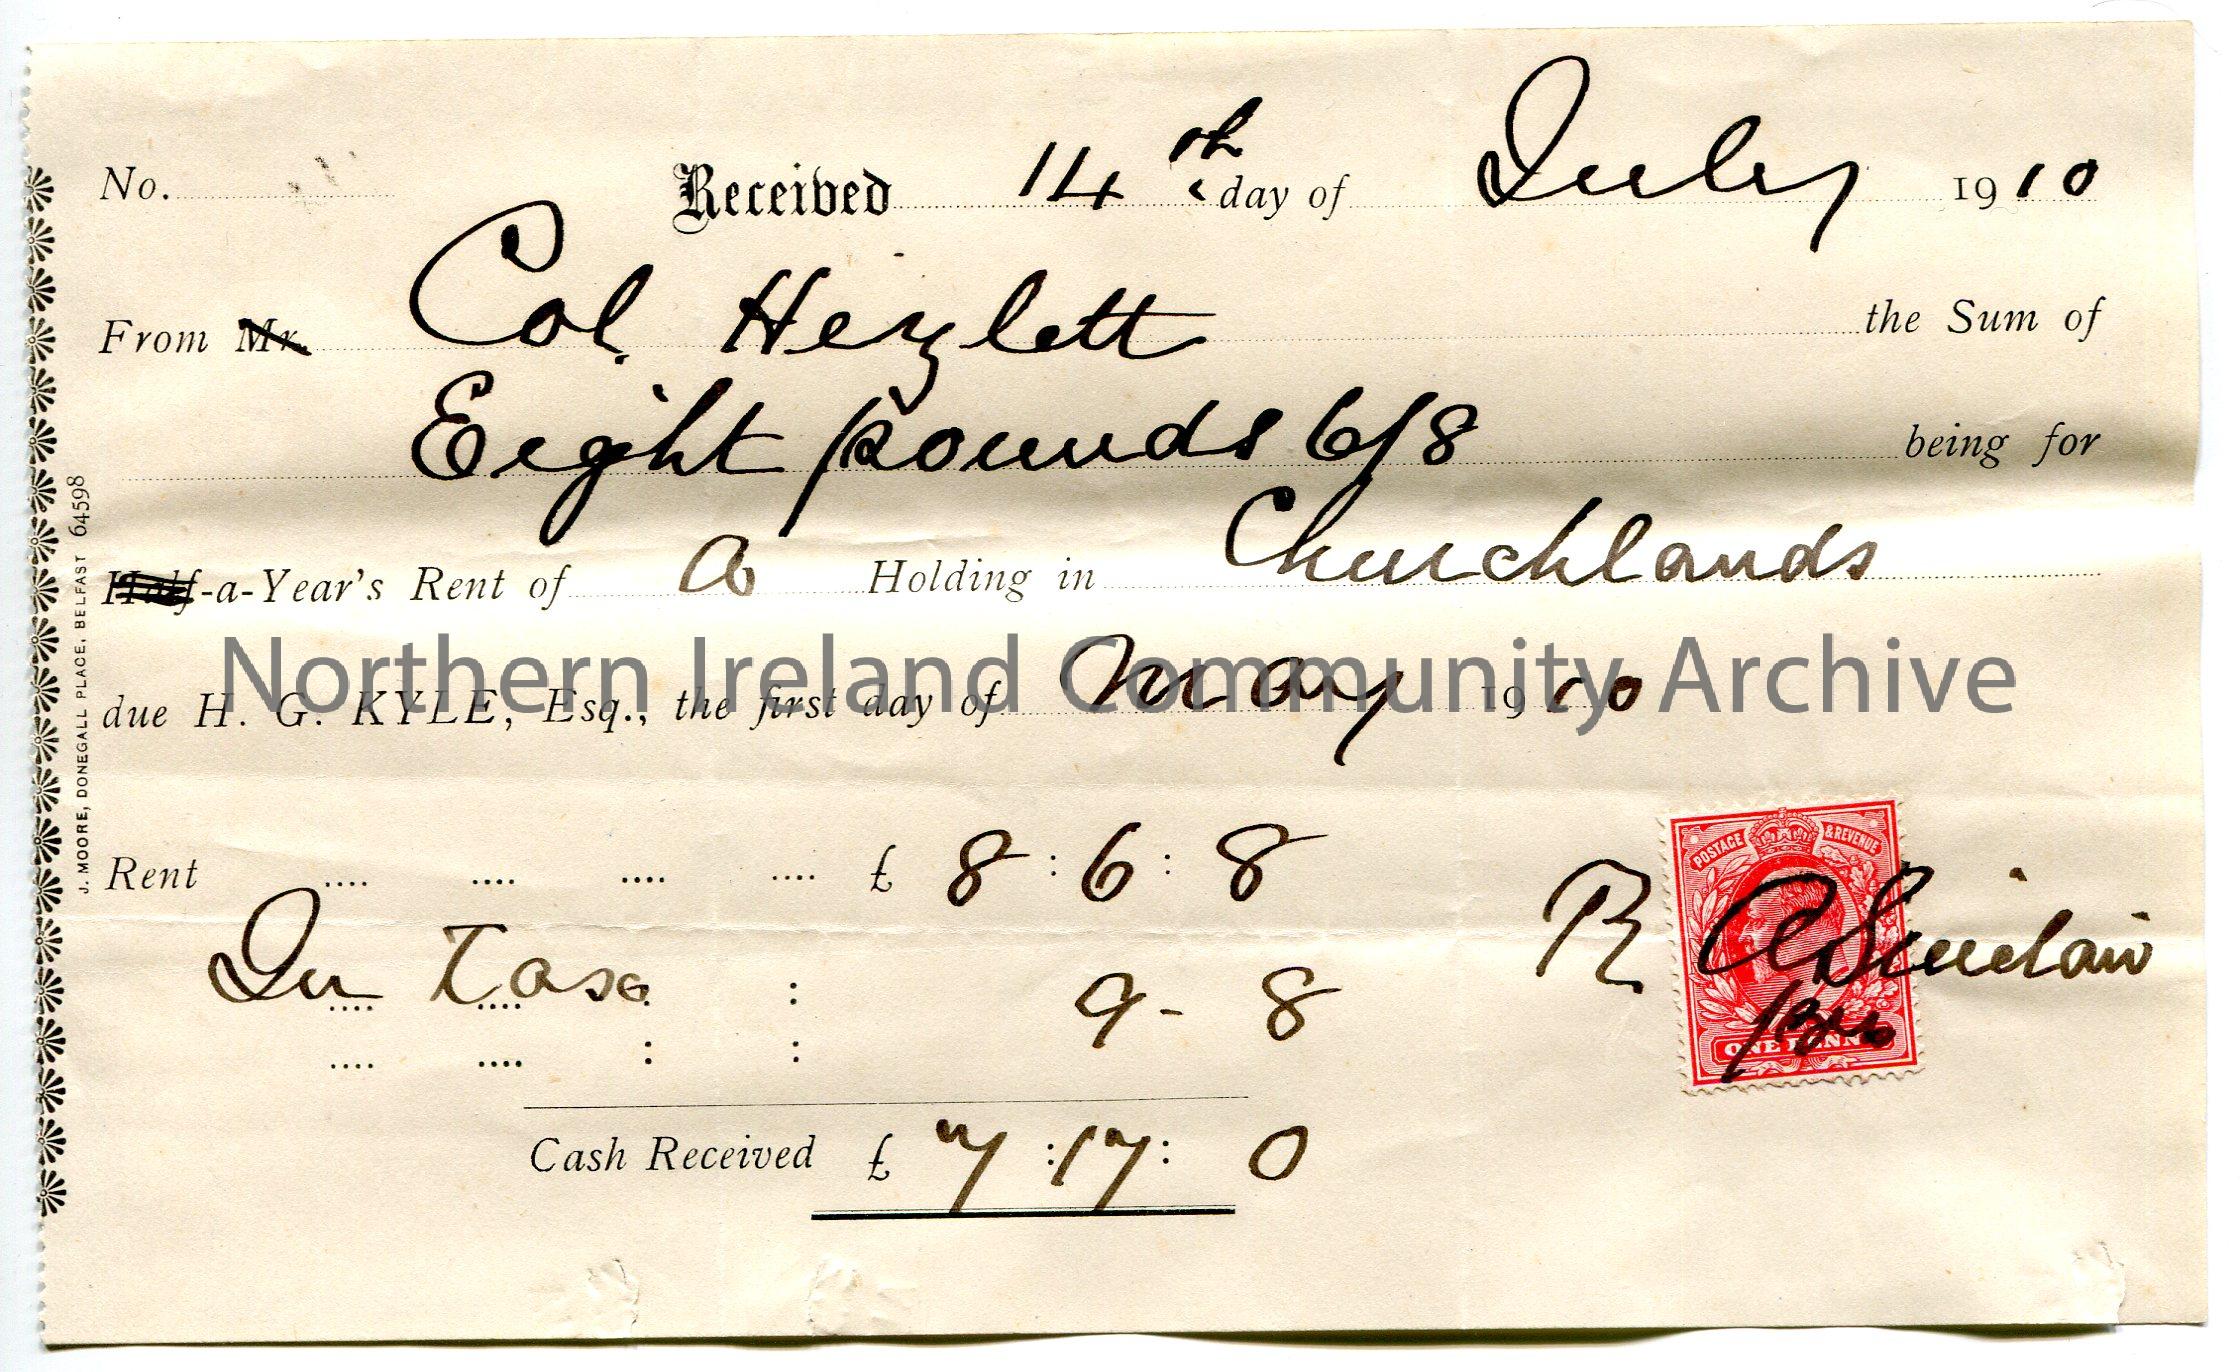 Handwritten receipt for payment from Col Hezlett [Hezlet] for the sum of £8.6.8 for one years rent of a holding in Churchlands due H G Kyle, Esq….